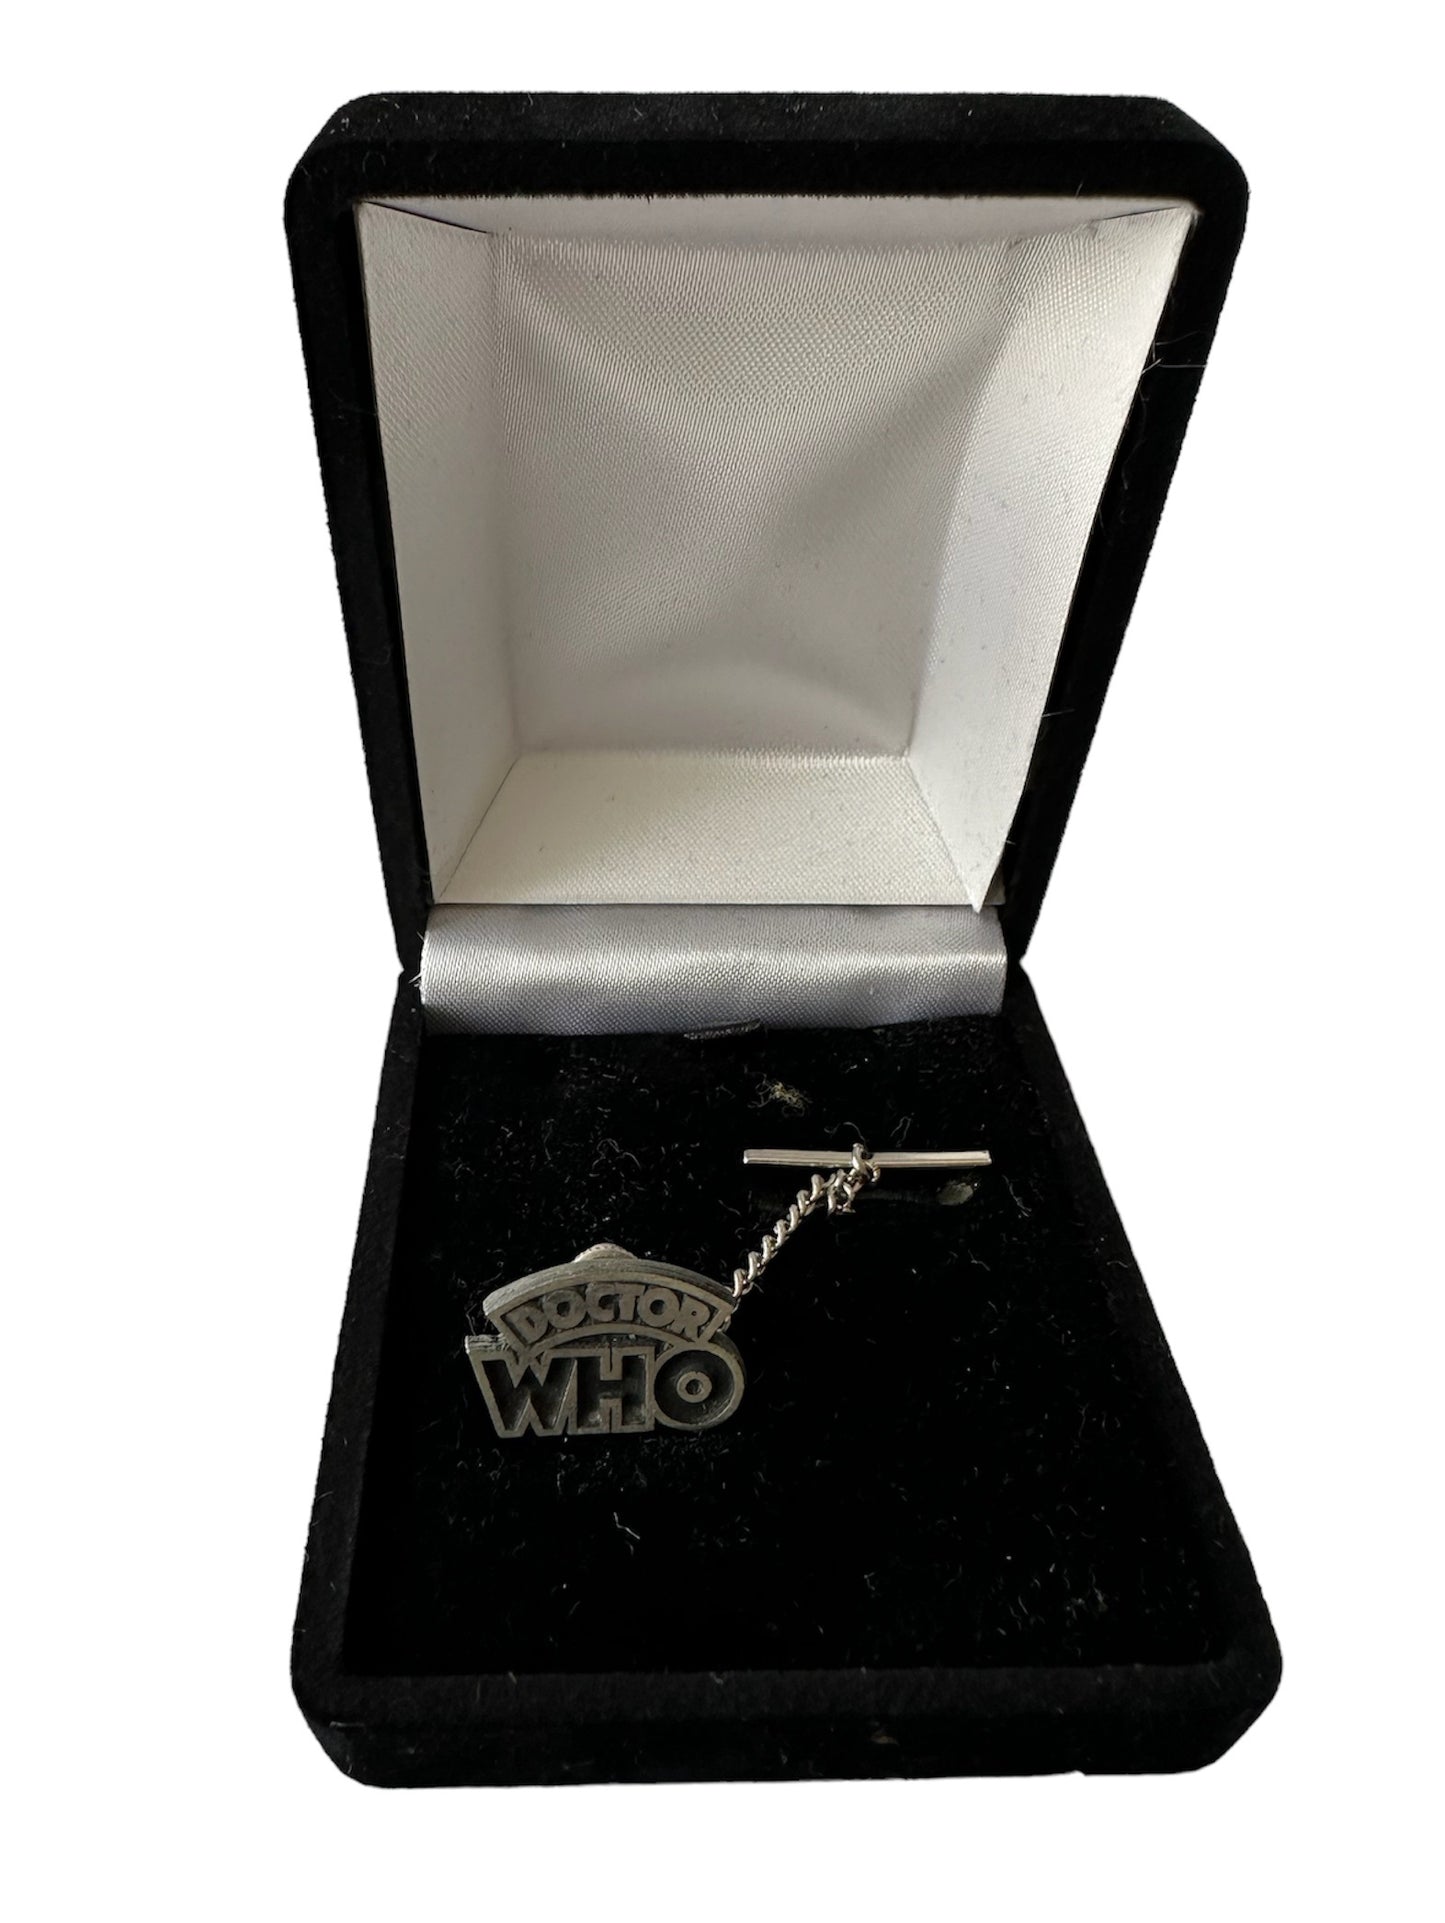 Vintage 1993 Doctor Dr Who 20th Anniversary Diamond Style Logo Tie Pin Badge - In The Original Box - Shop Stock Room Find